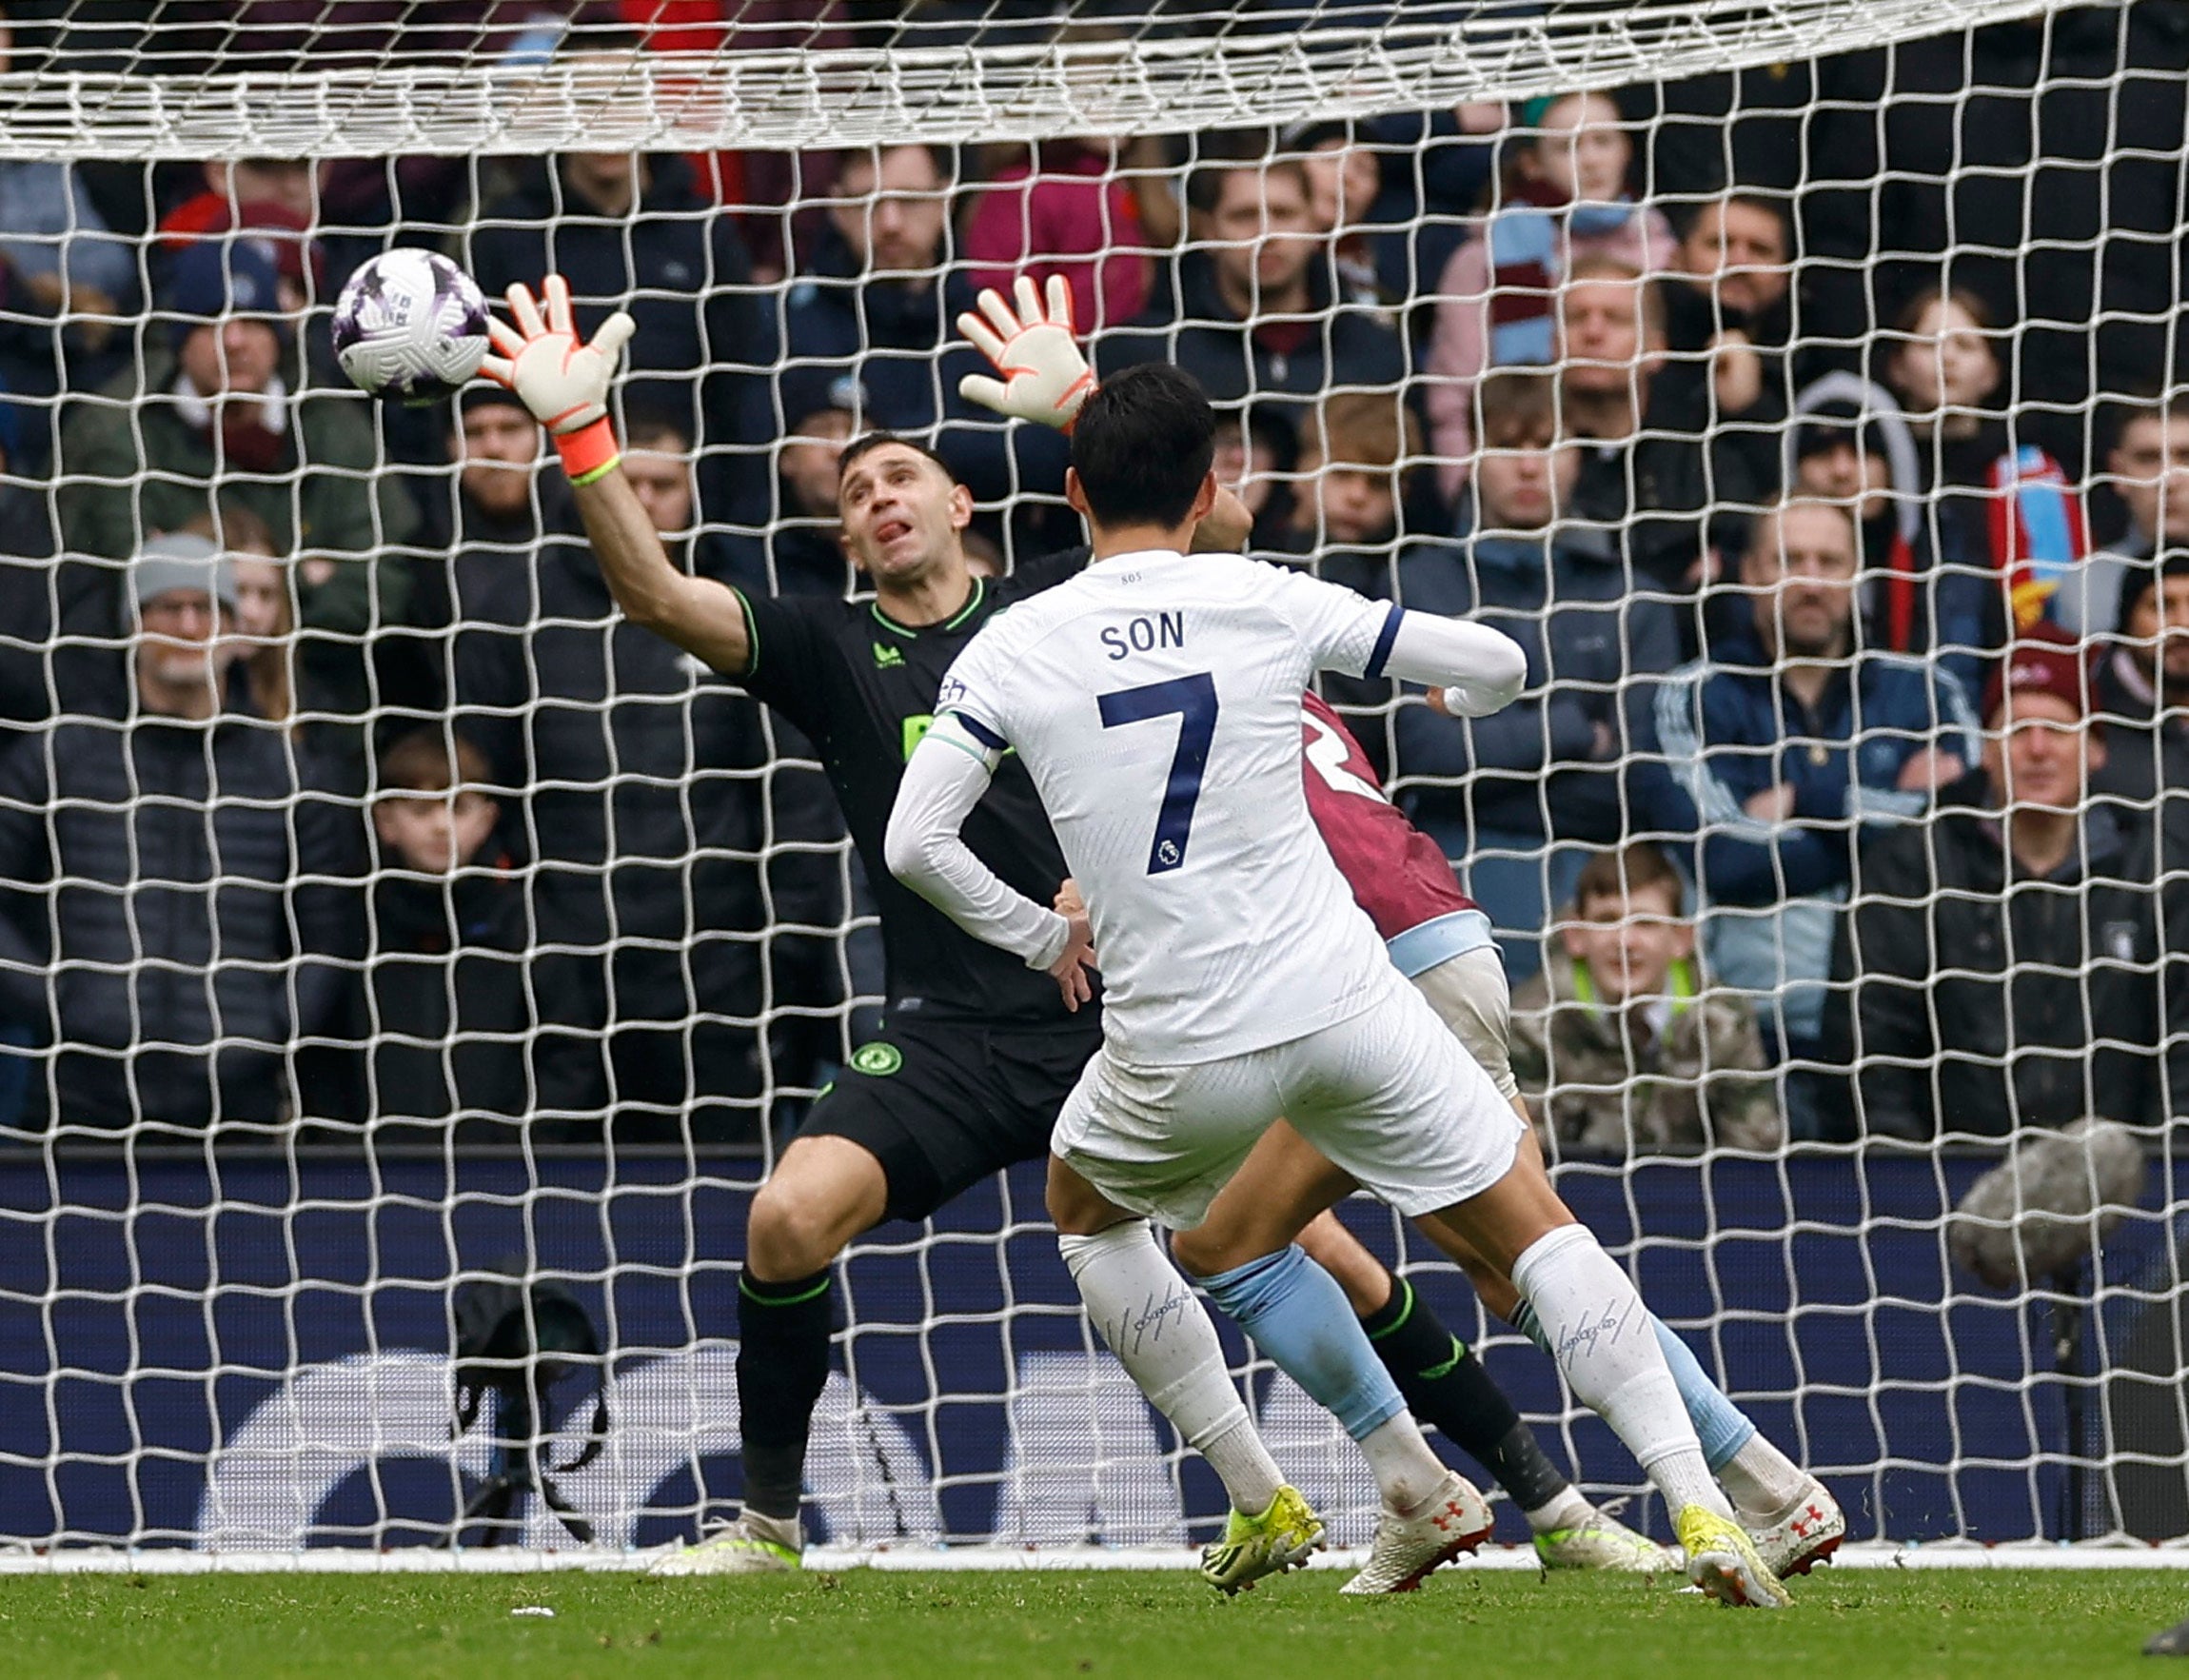 Aston Villa vs Tottenham LIVE: Premier League result and reaction as Son Heung-min inspires big win in top-four race | The Independent